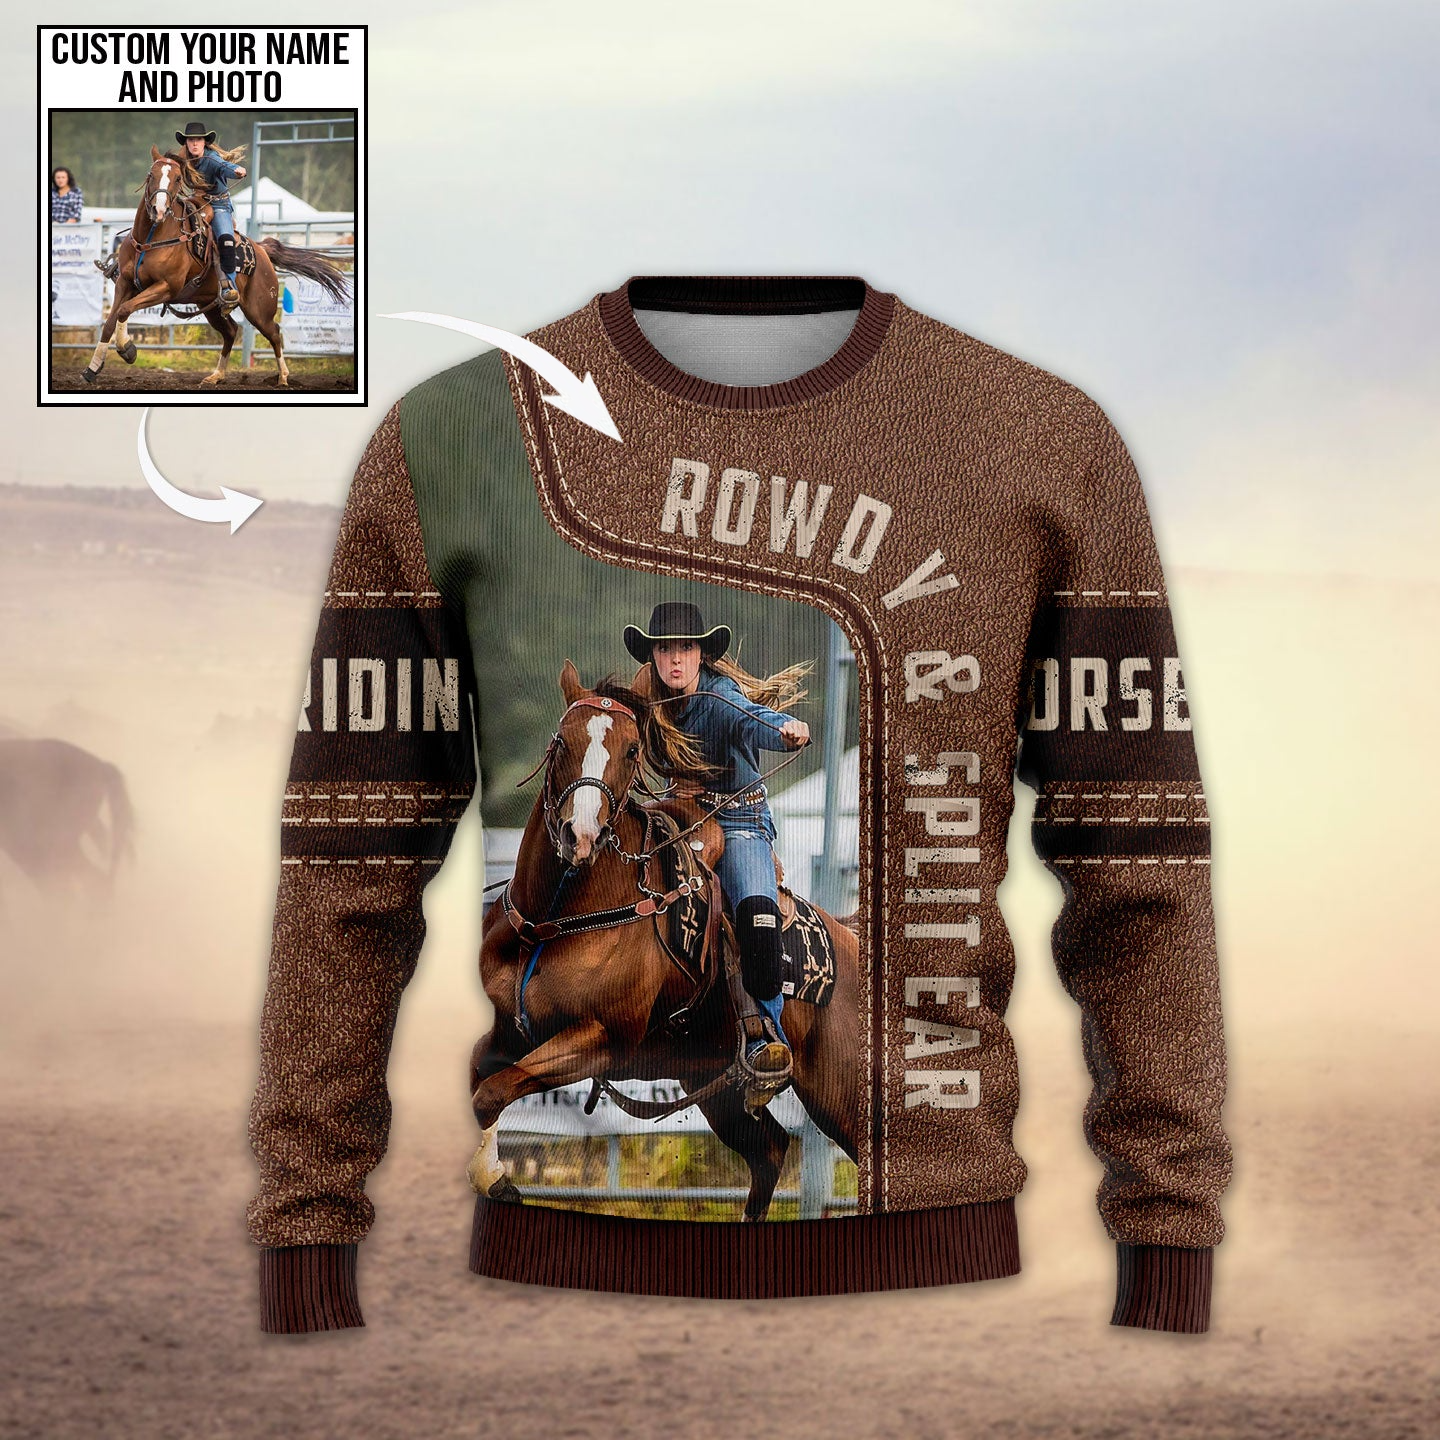 Riding Horse Ugly Christmas Sweater Custom Photo And Name, Perfect Gift and Outfit For Christmas, Halloween, Winter